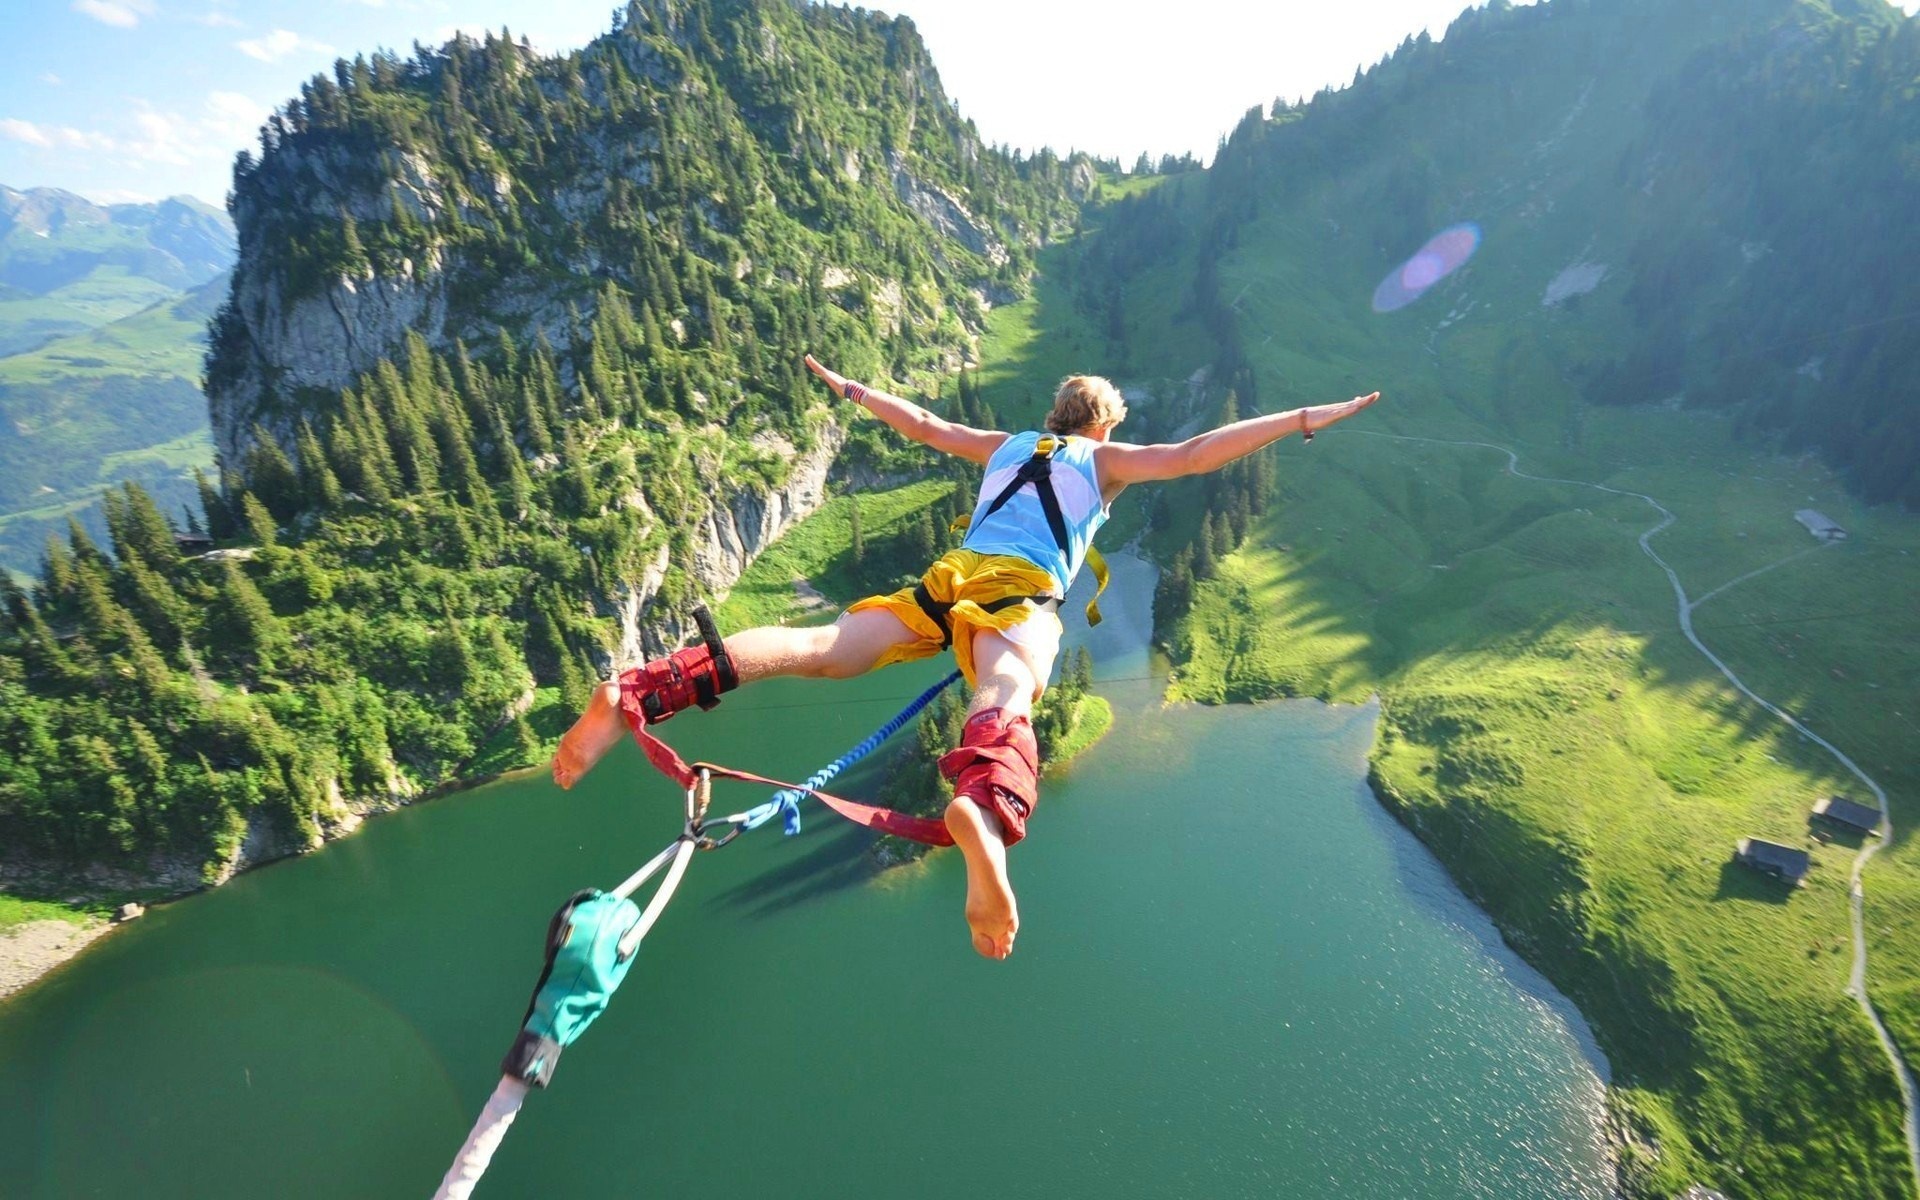 extreme hd wallpapers,jumping,extreme sport,adventure,bungee jumping,fjord